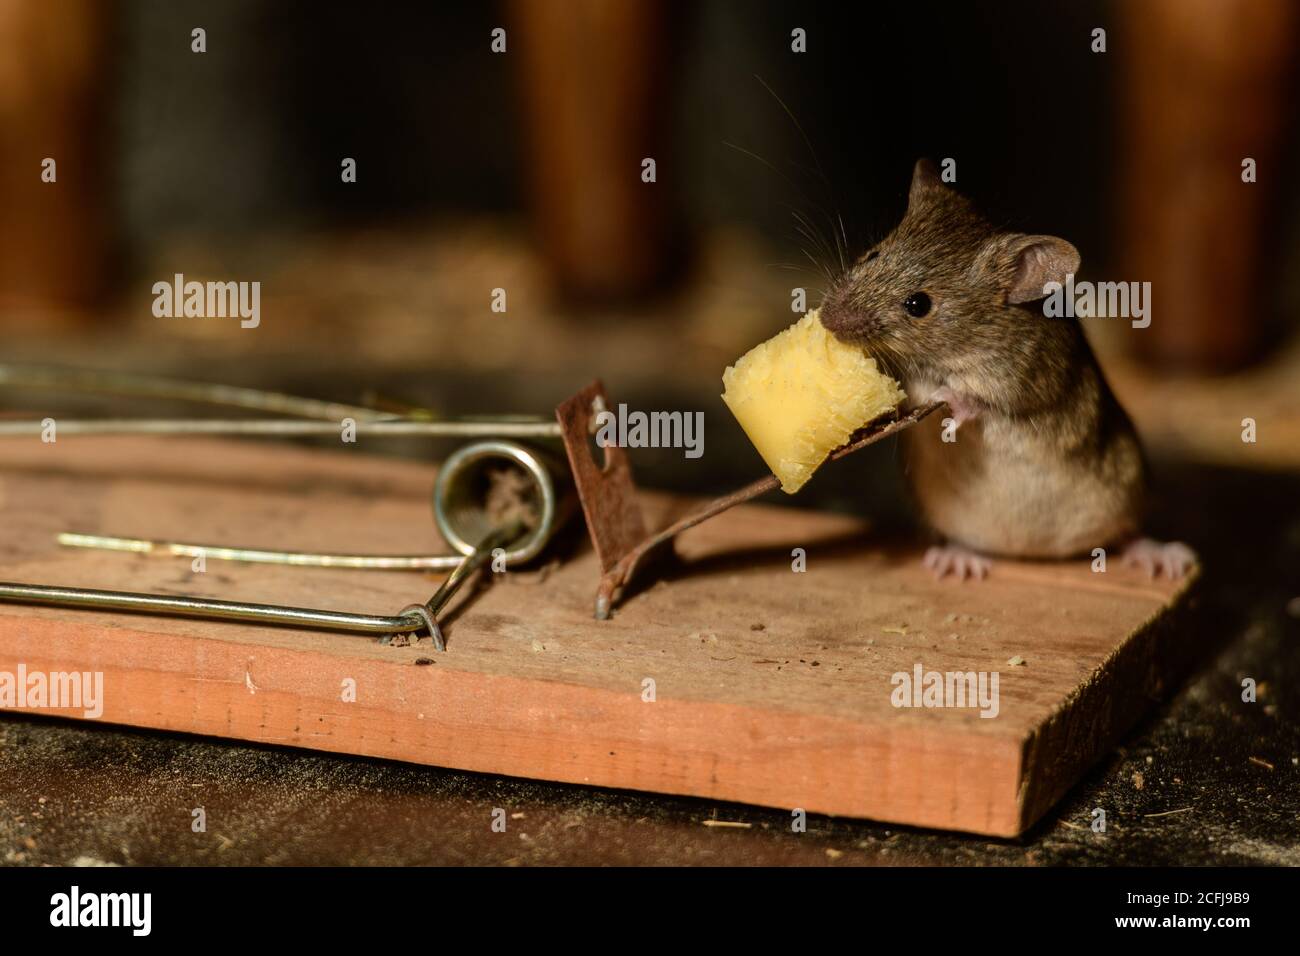 https://c8.alamy.com/comp/2CFJ9B9/autumn-or-fall-and-the-mice-come-in-from-the-coldand-the-trap-is-set-2CFJ9B9.jpg